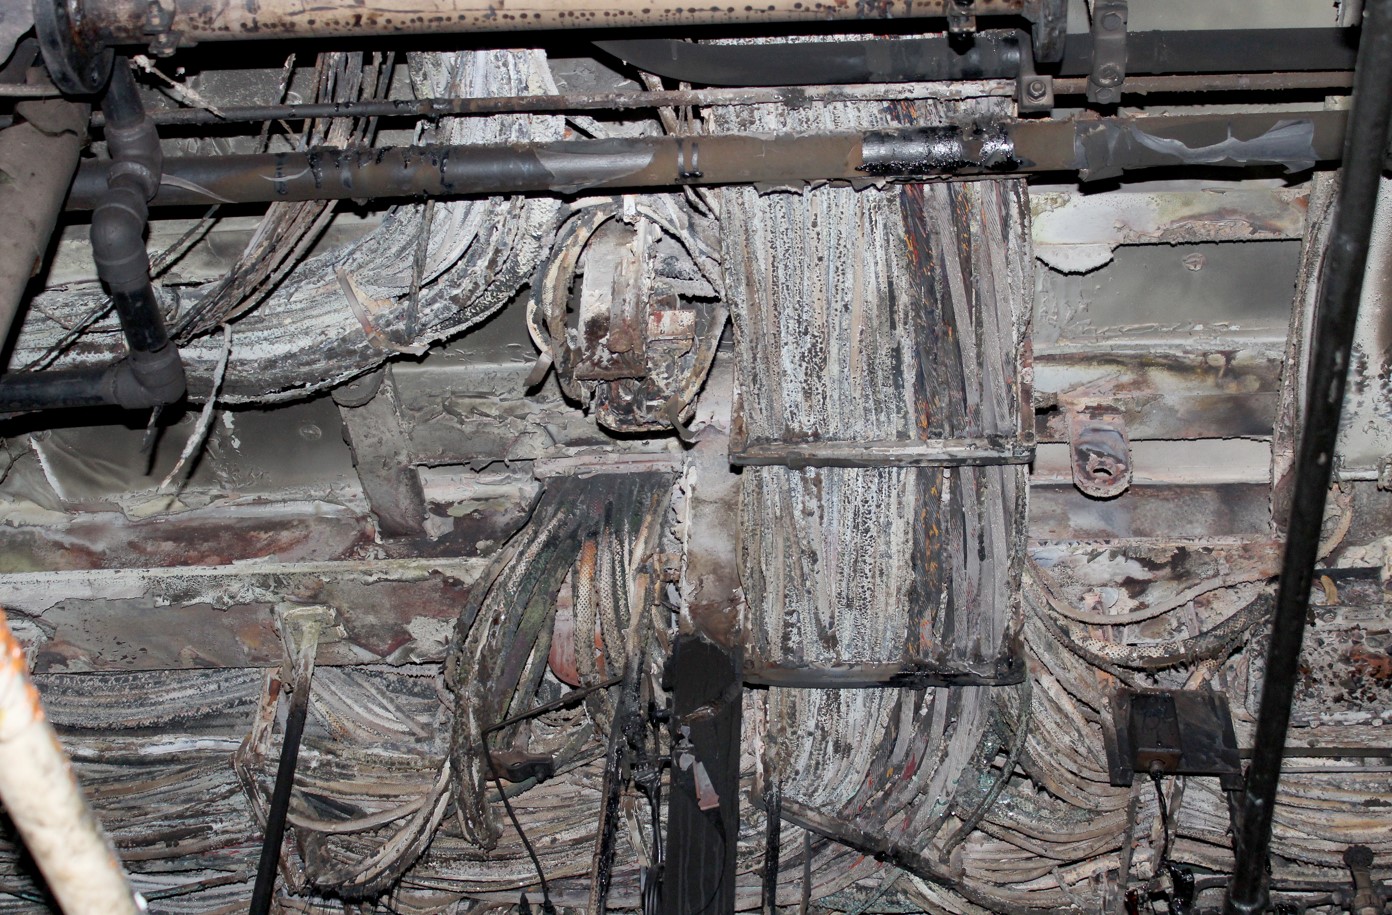 Burned electrical cables running along the underside of the 24-foot flat (Source: TSB)